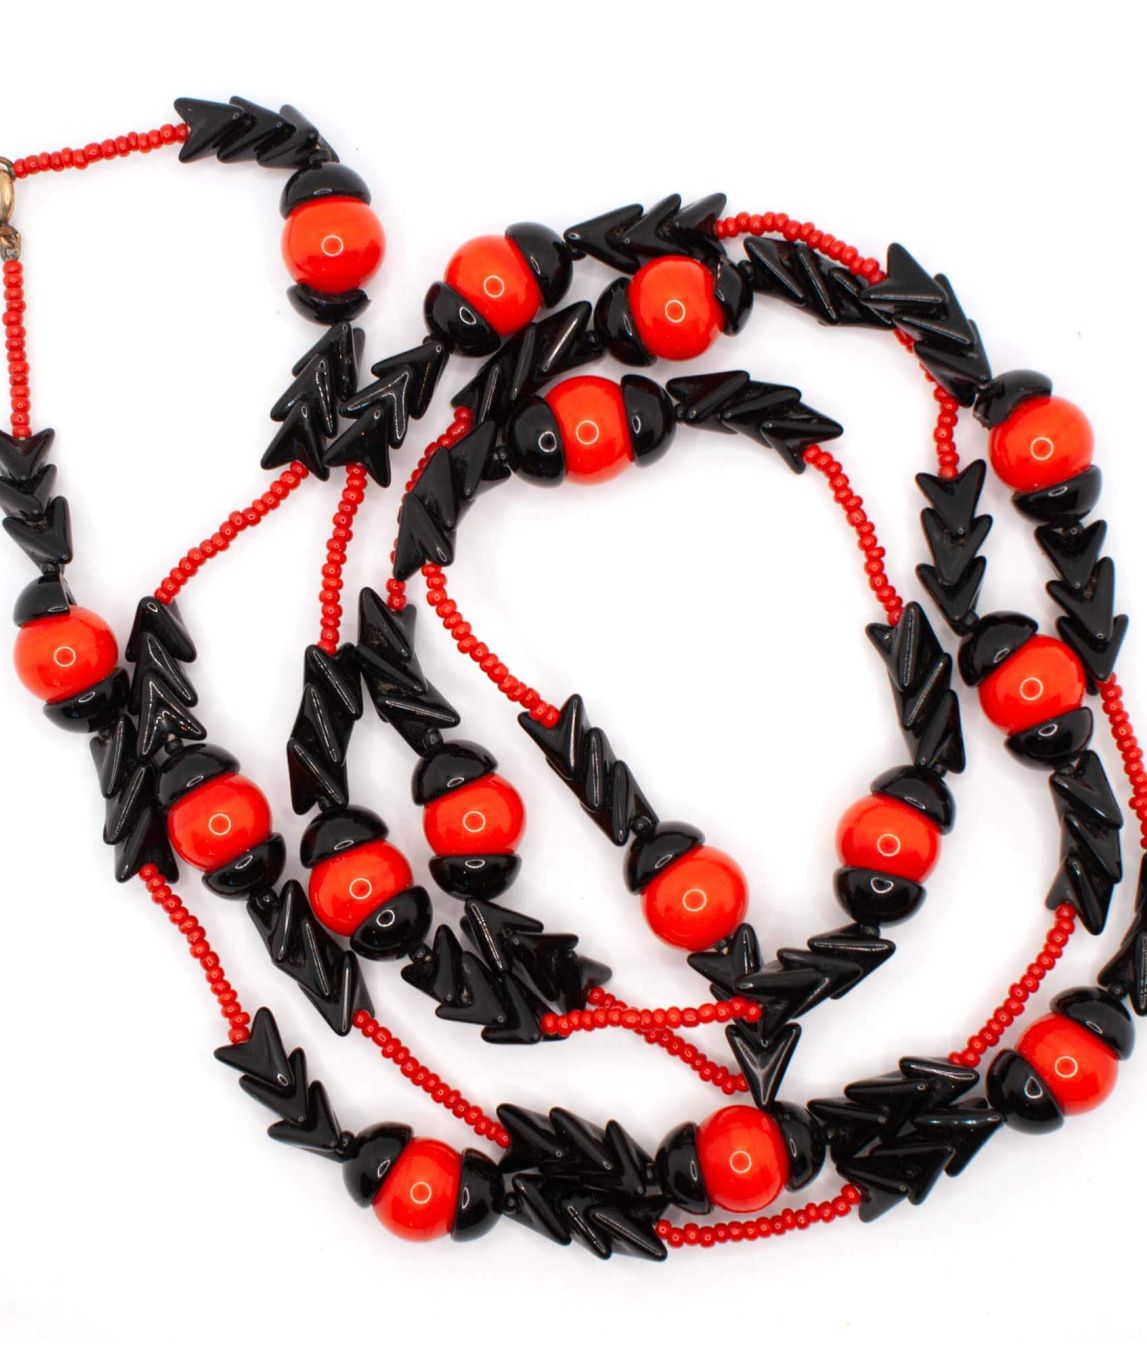 Long beaded necklace by Miriam Haskell with red and black arrow beads